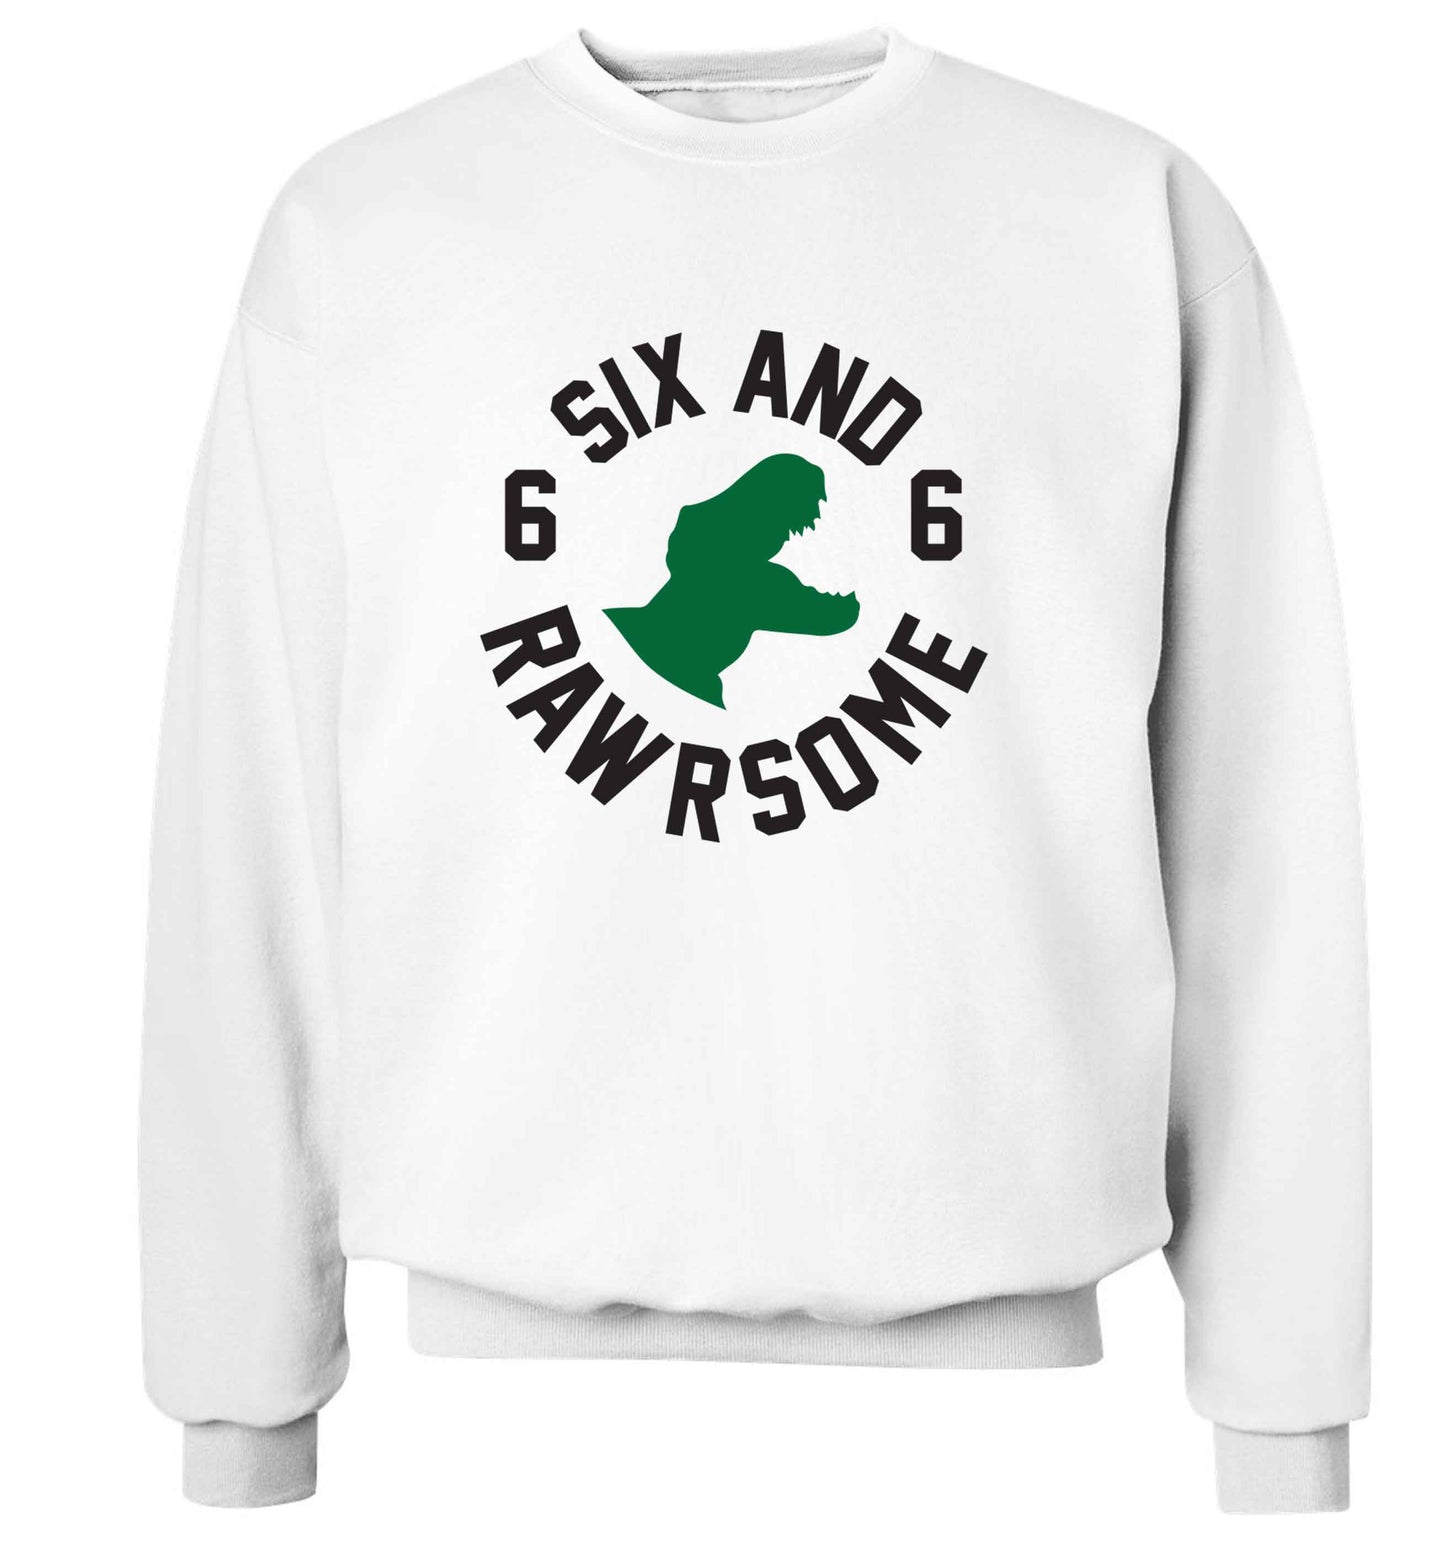 Six and rawrsome adult's unisex white sweater 2XL